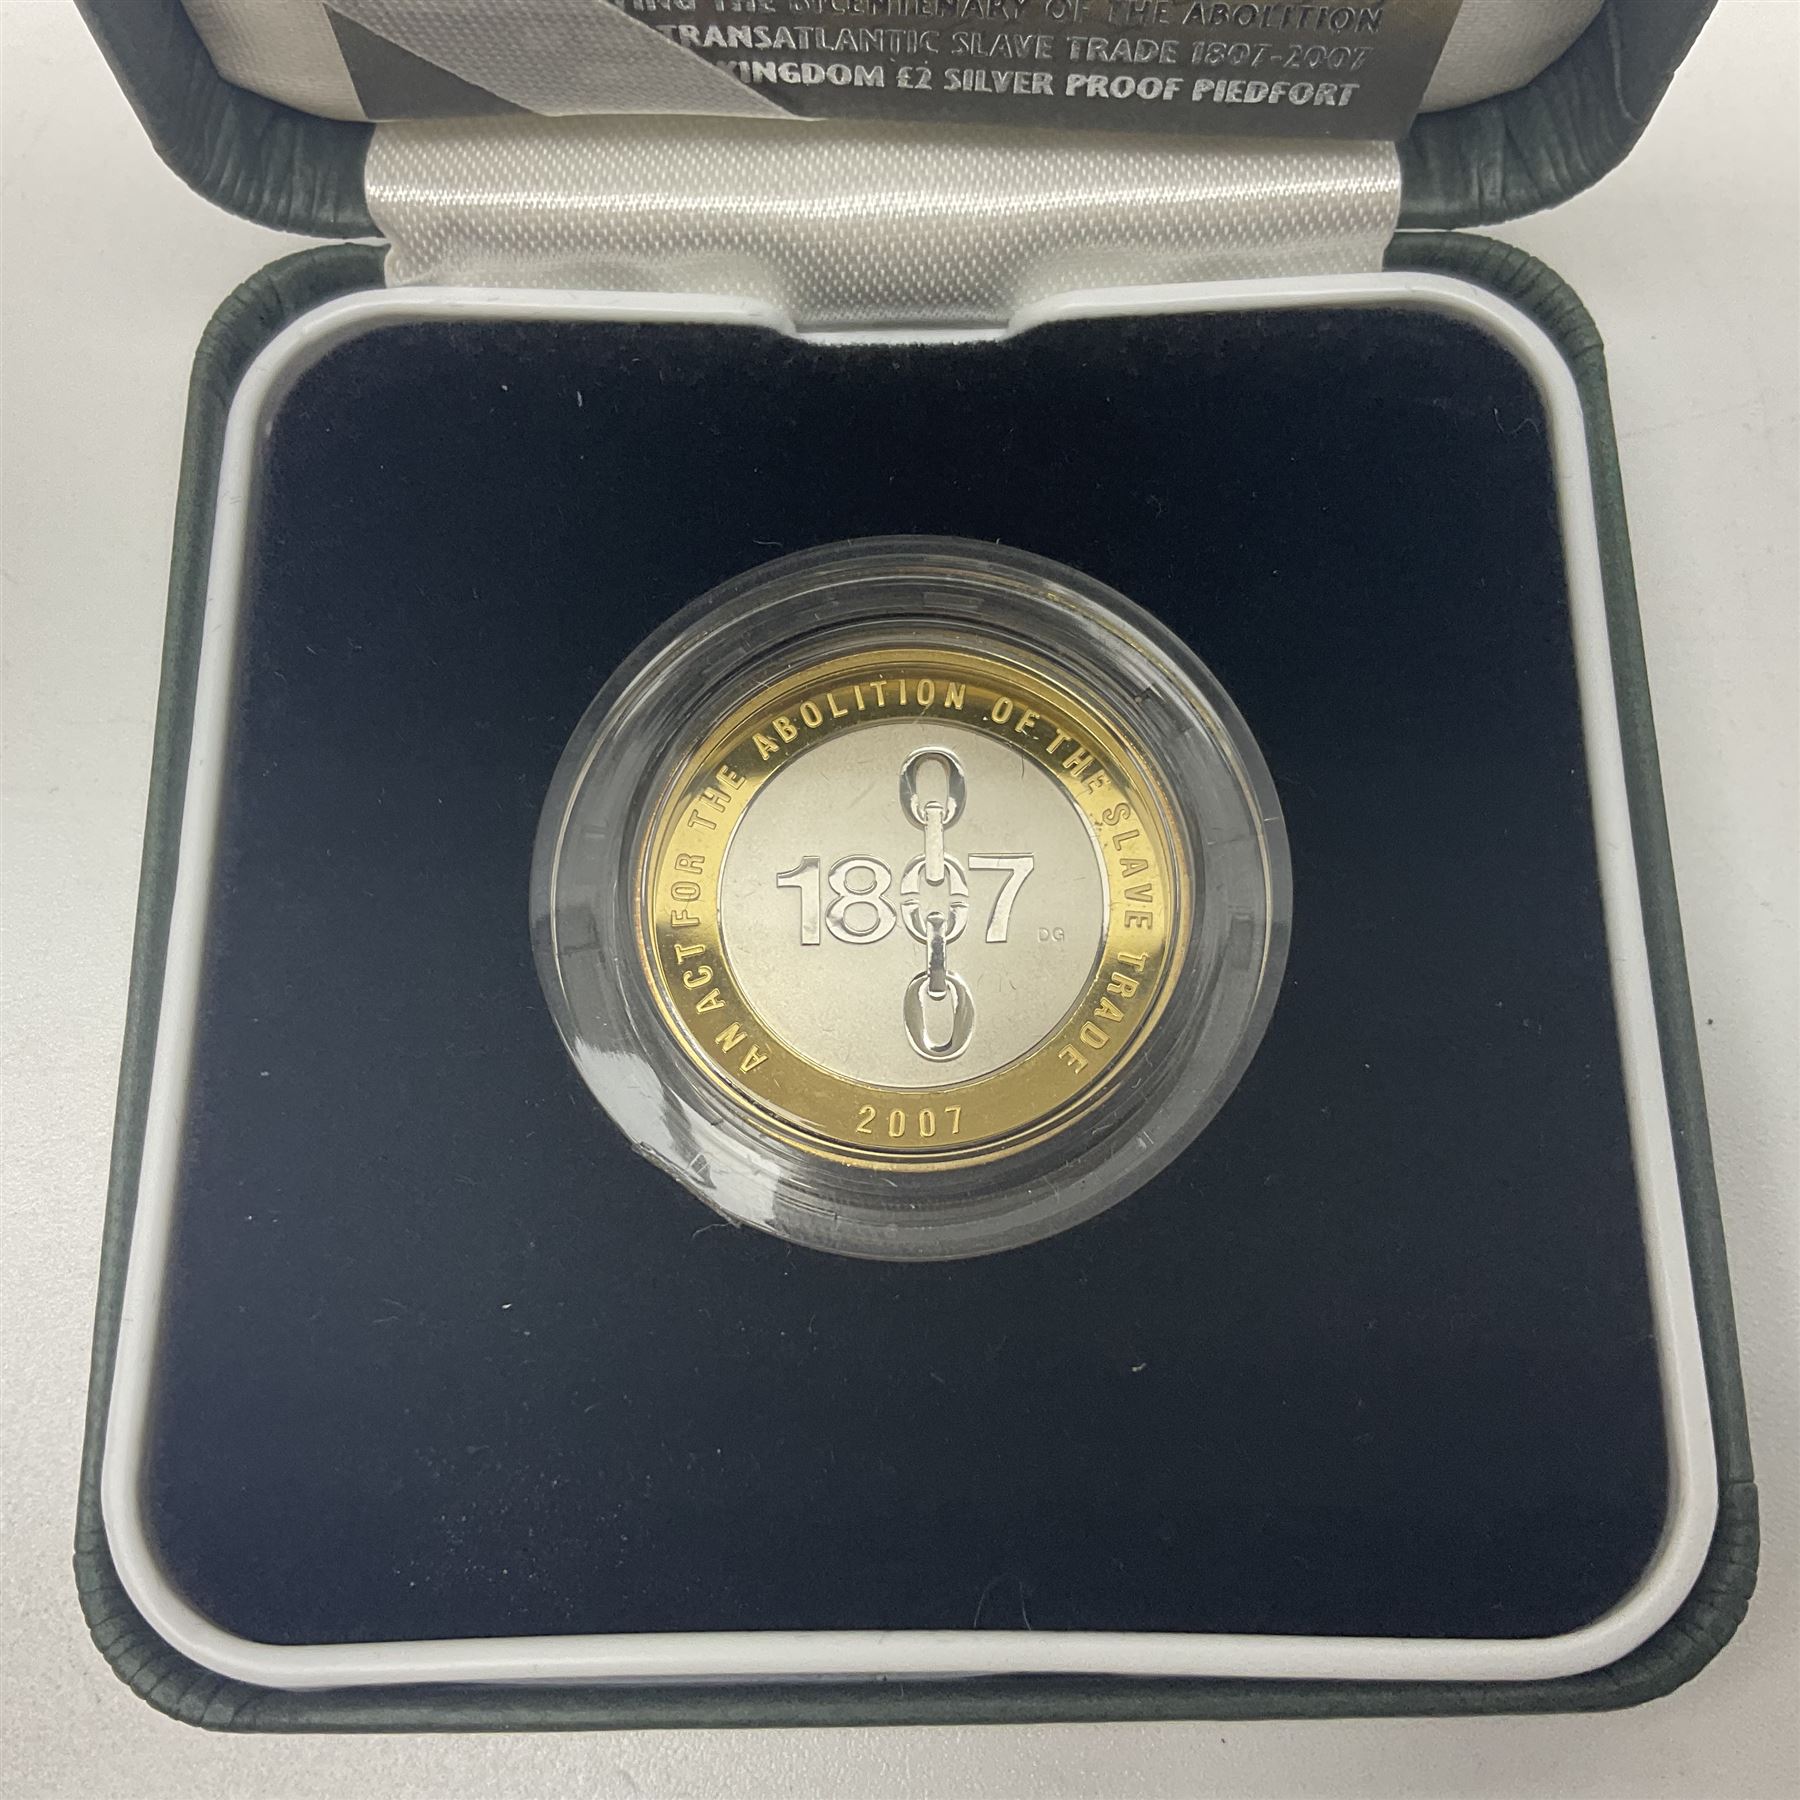 The Royal Mint United Kingdom 2007 'Abolition of the Slave Trade' silver proof piedfort two pound co - Image 6 of 6